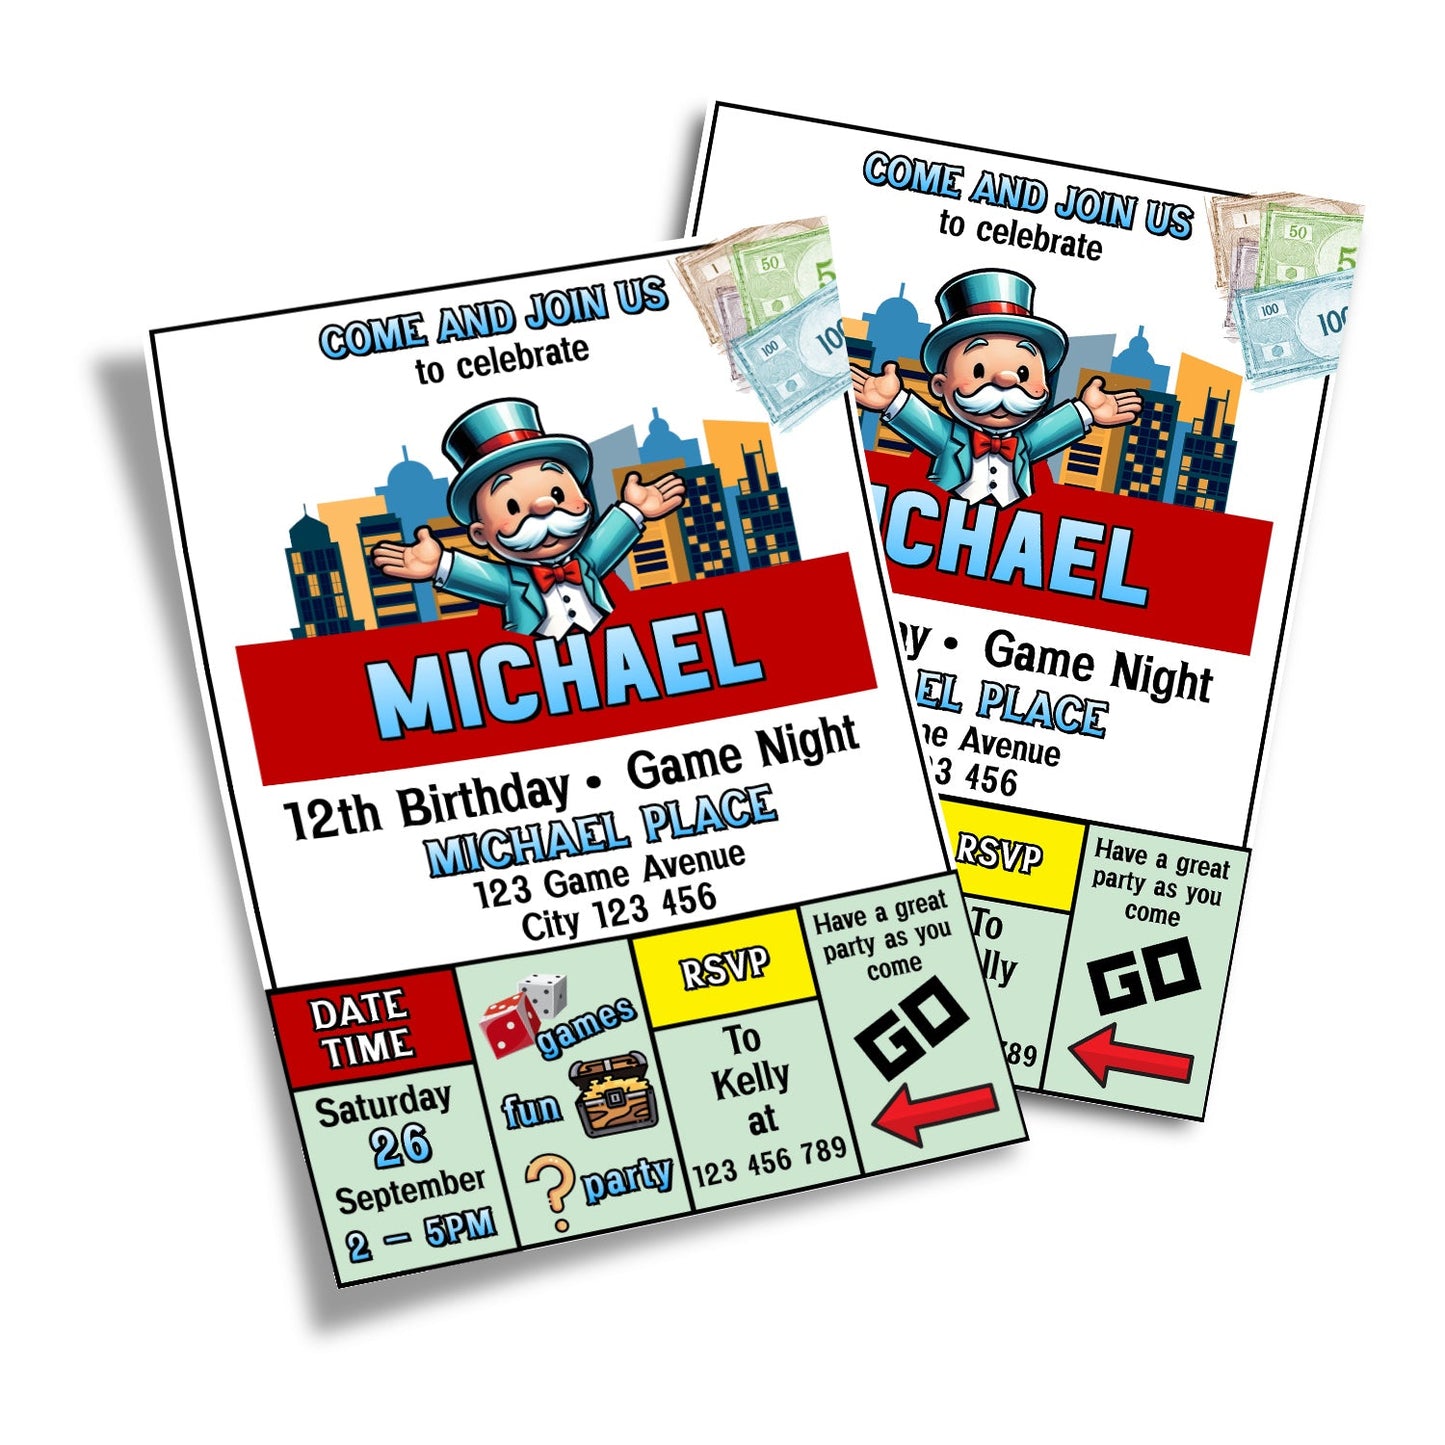 Birthday card invitations with personalized Monopoly Go design